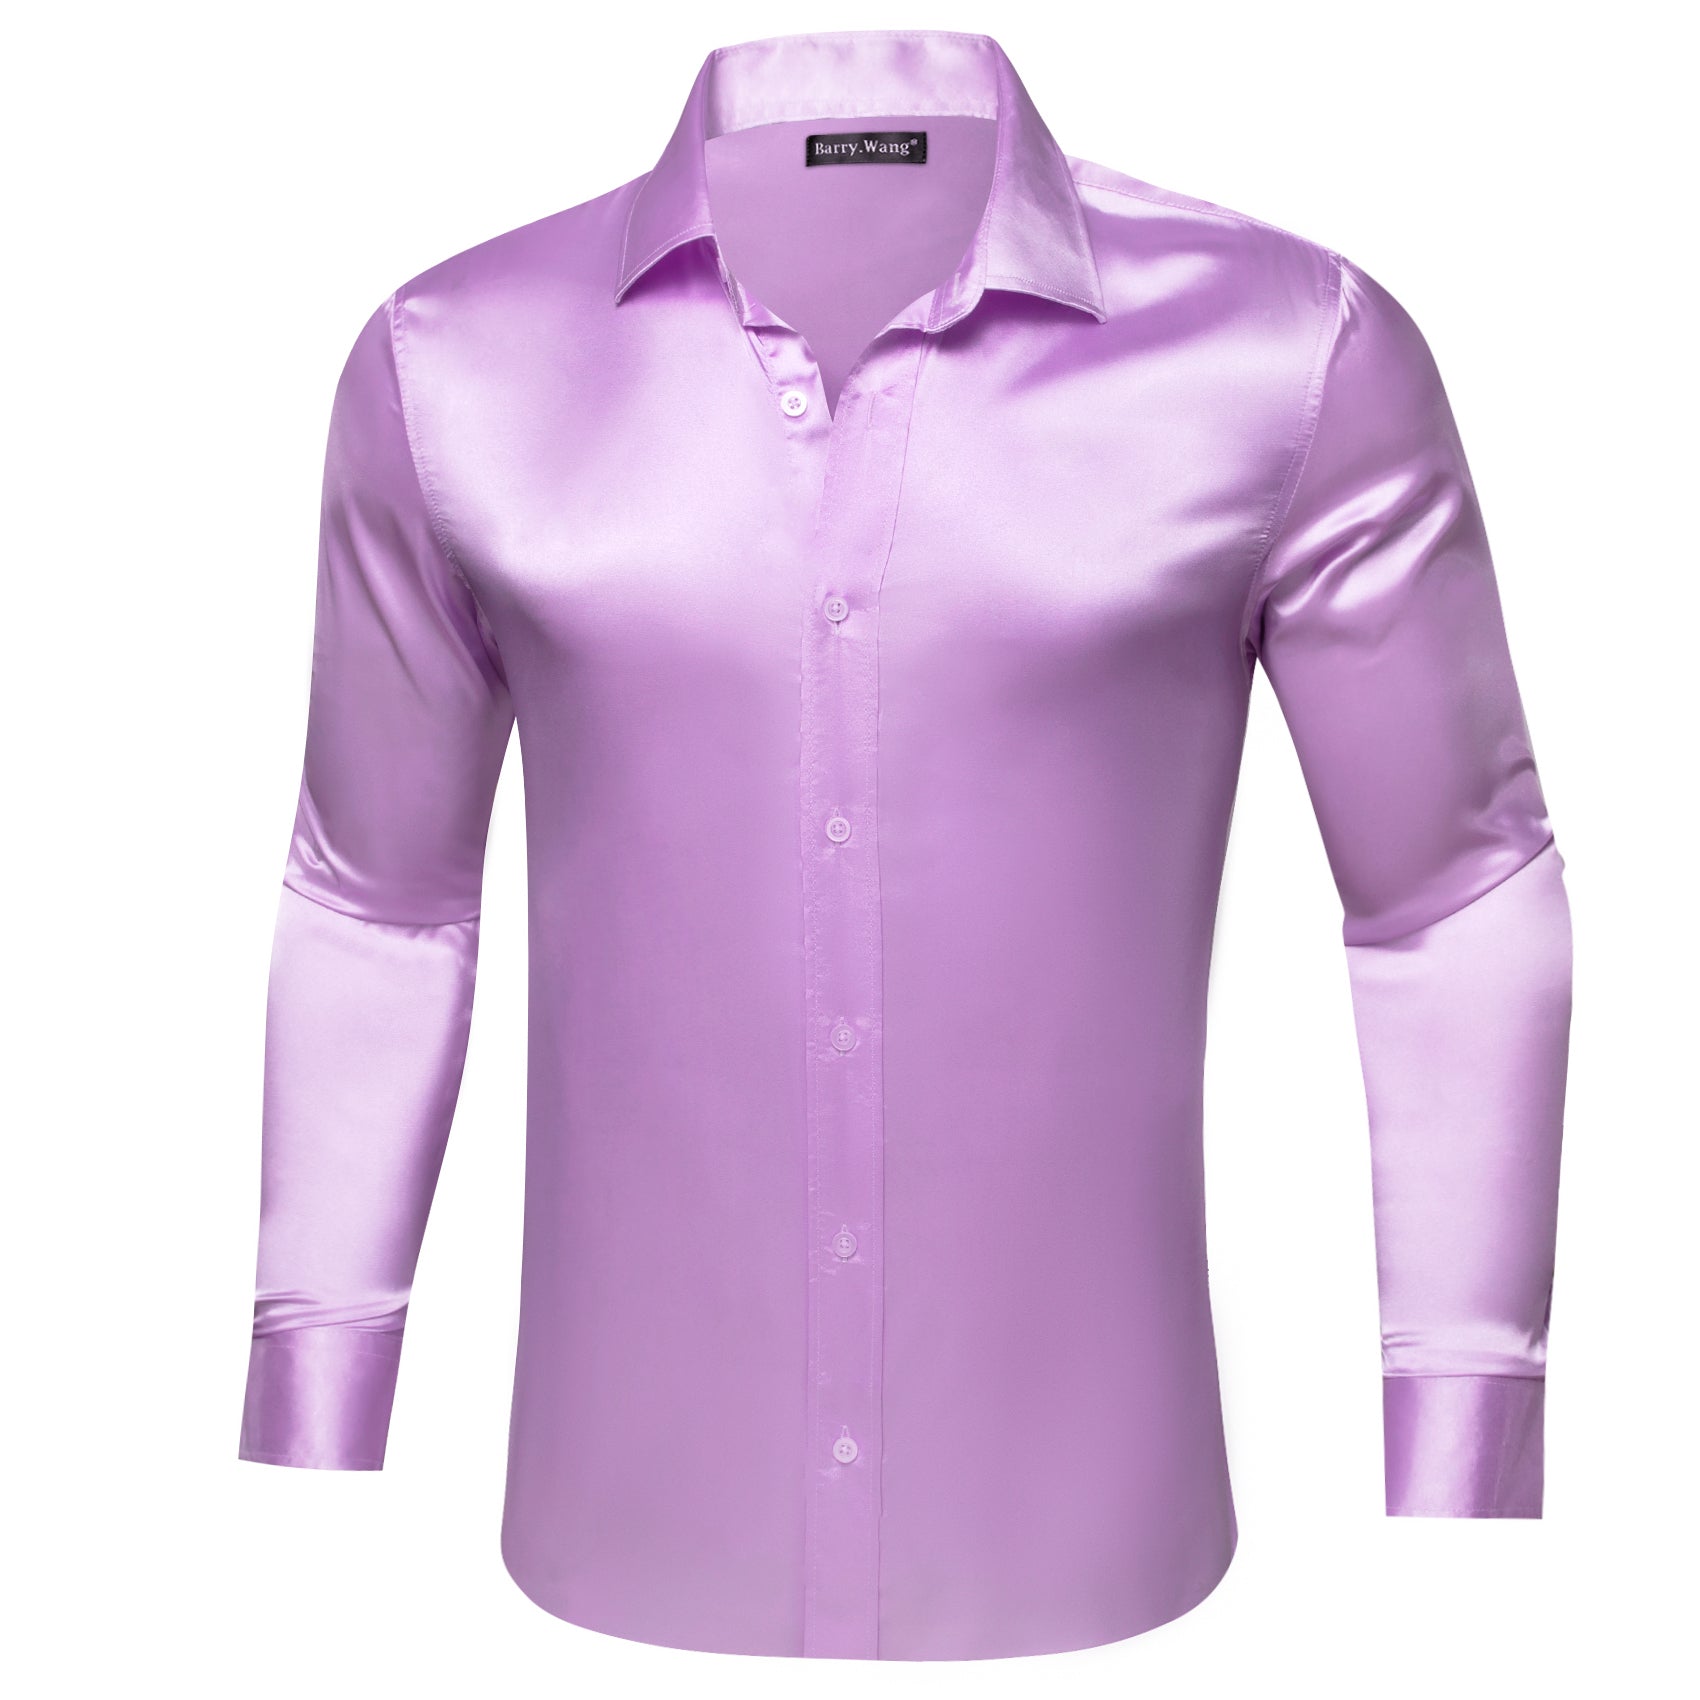 Barry.wang Pale Lilac Solid Silk Shirt